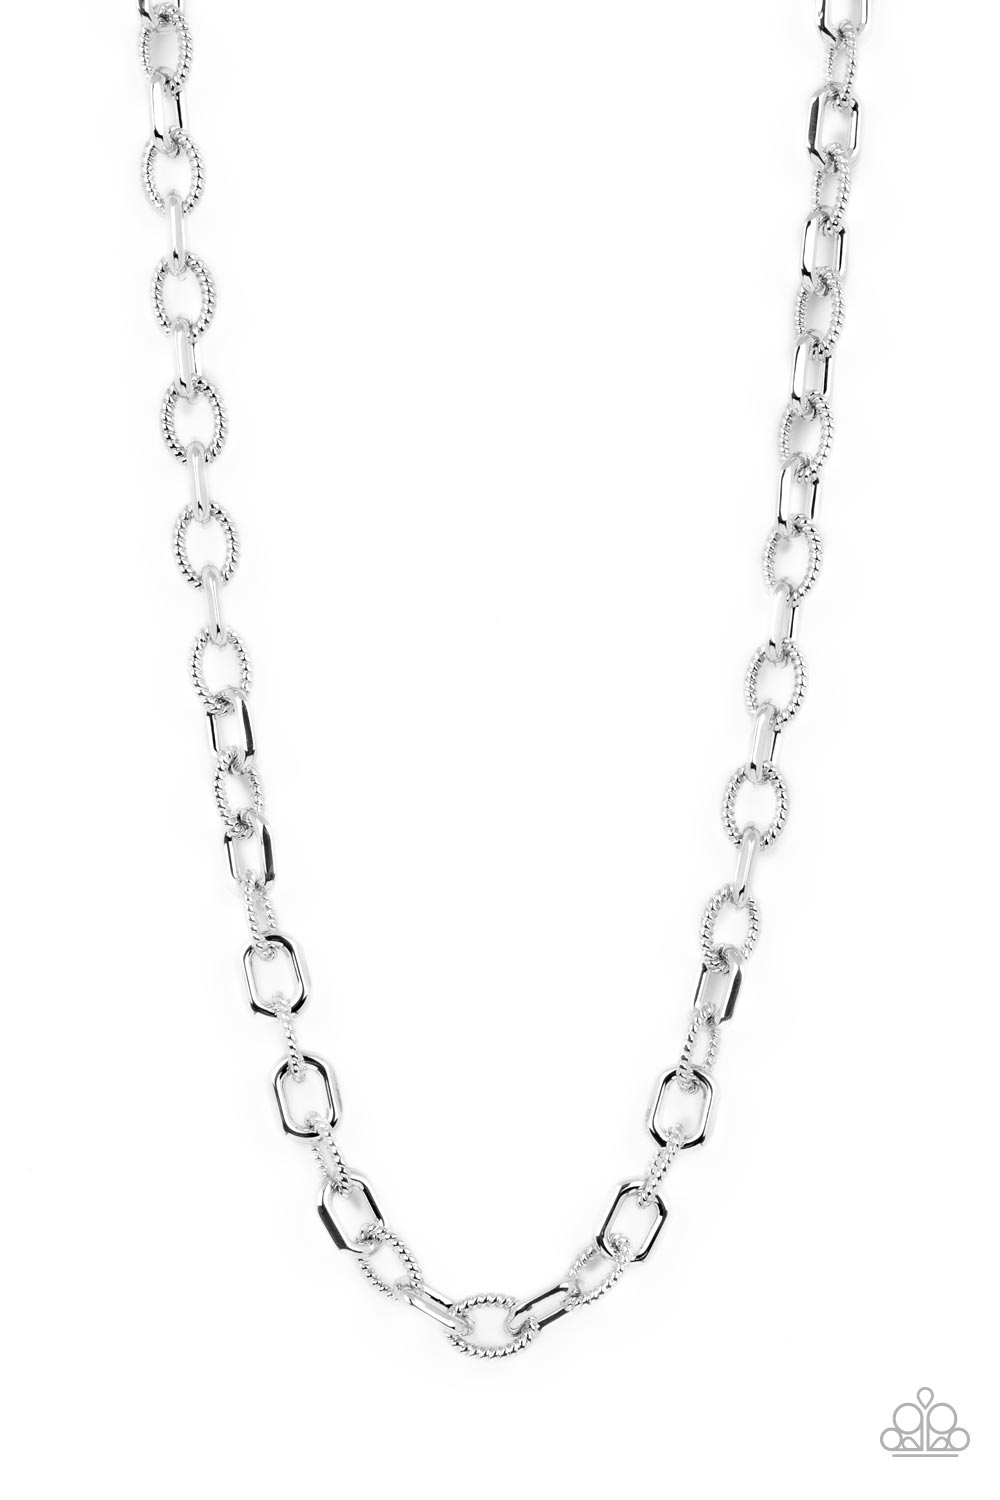 Chain Necklace Urban - - Motorhead Bling Modern and Bee Silver Accessories Jewelry Sugar – Paparazzi